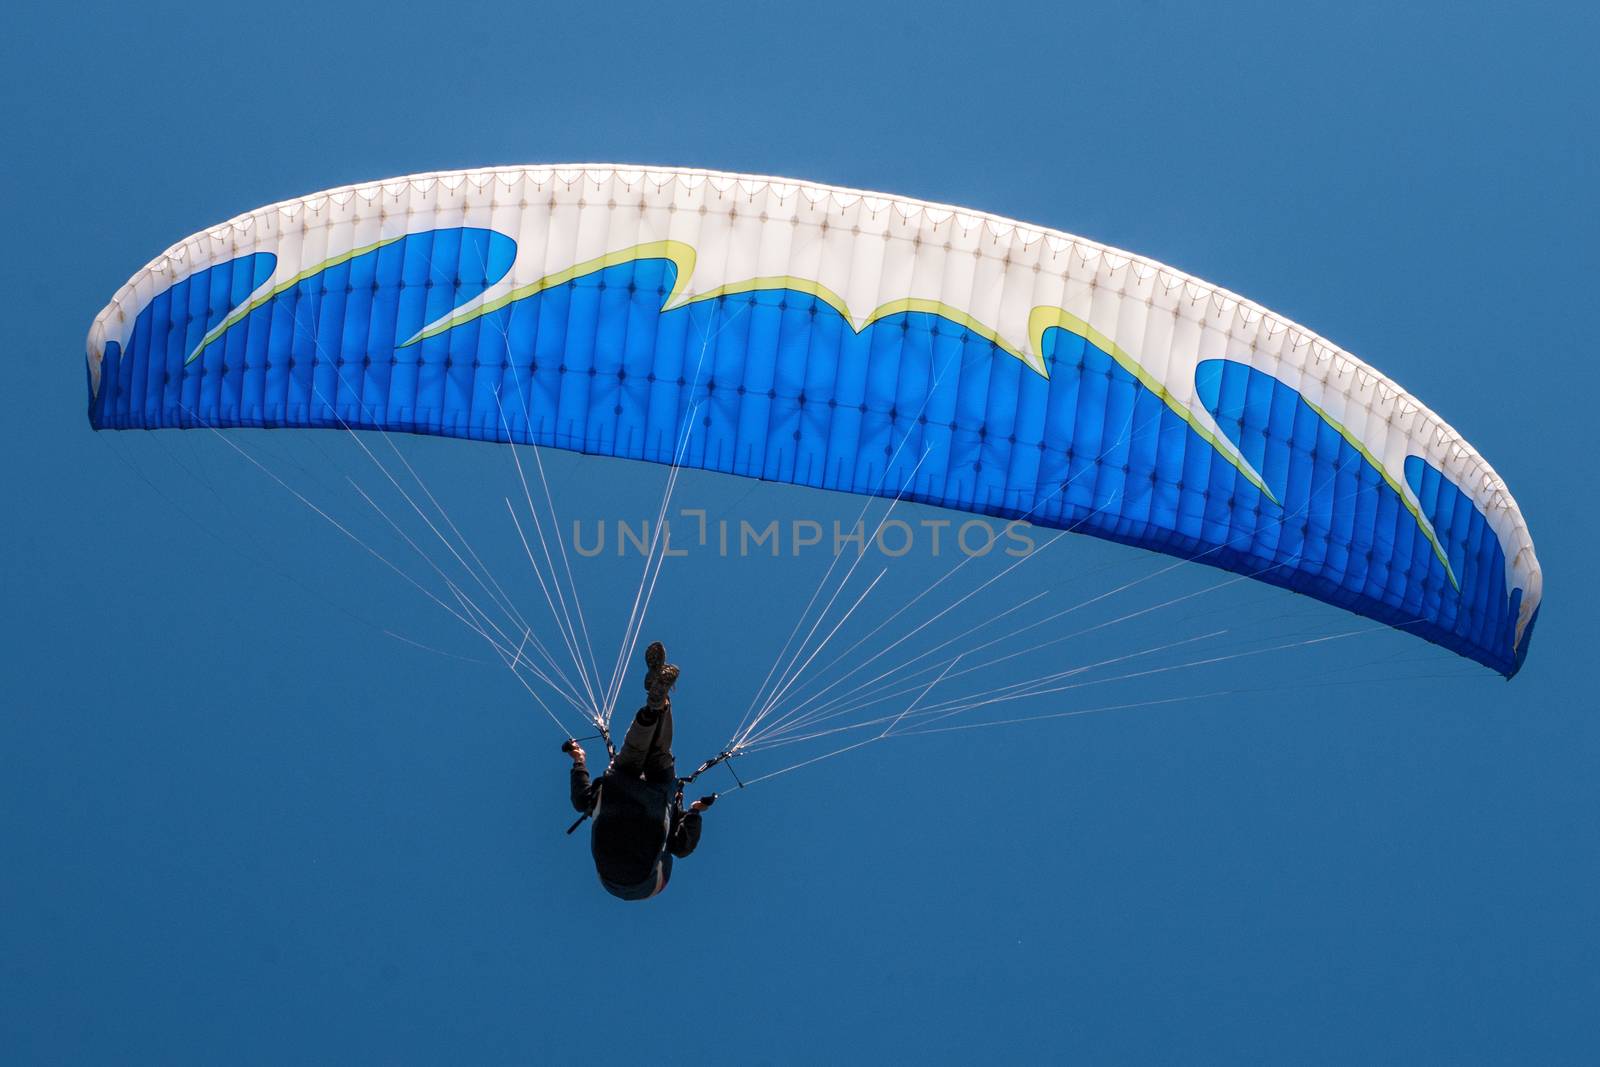 Paragliding is the recreational and competitive adventure sport of flying paragliders: lightweight, free-flying, foot-launched glider aircraft with no rigid primary structure